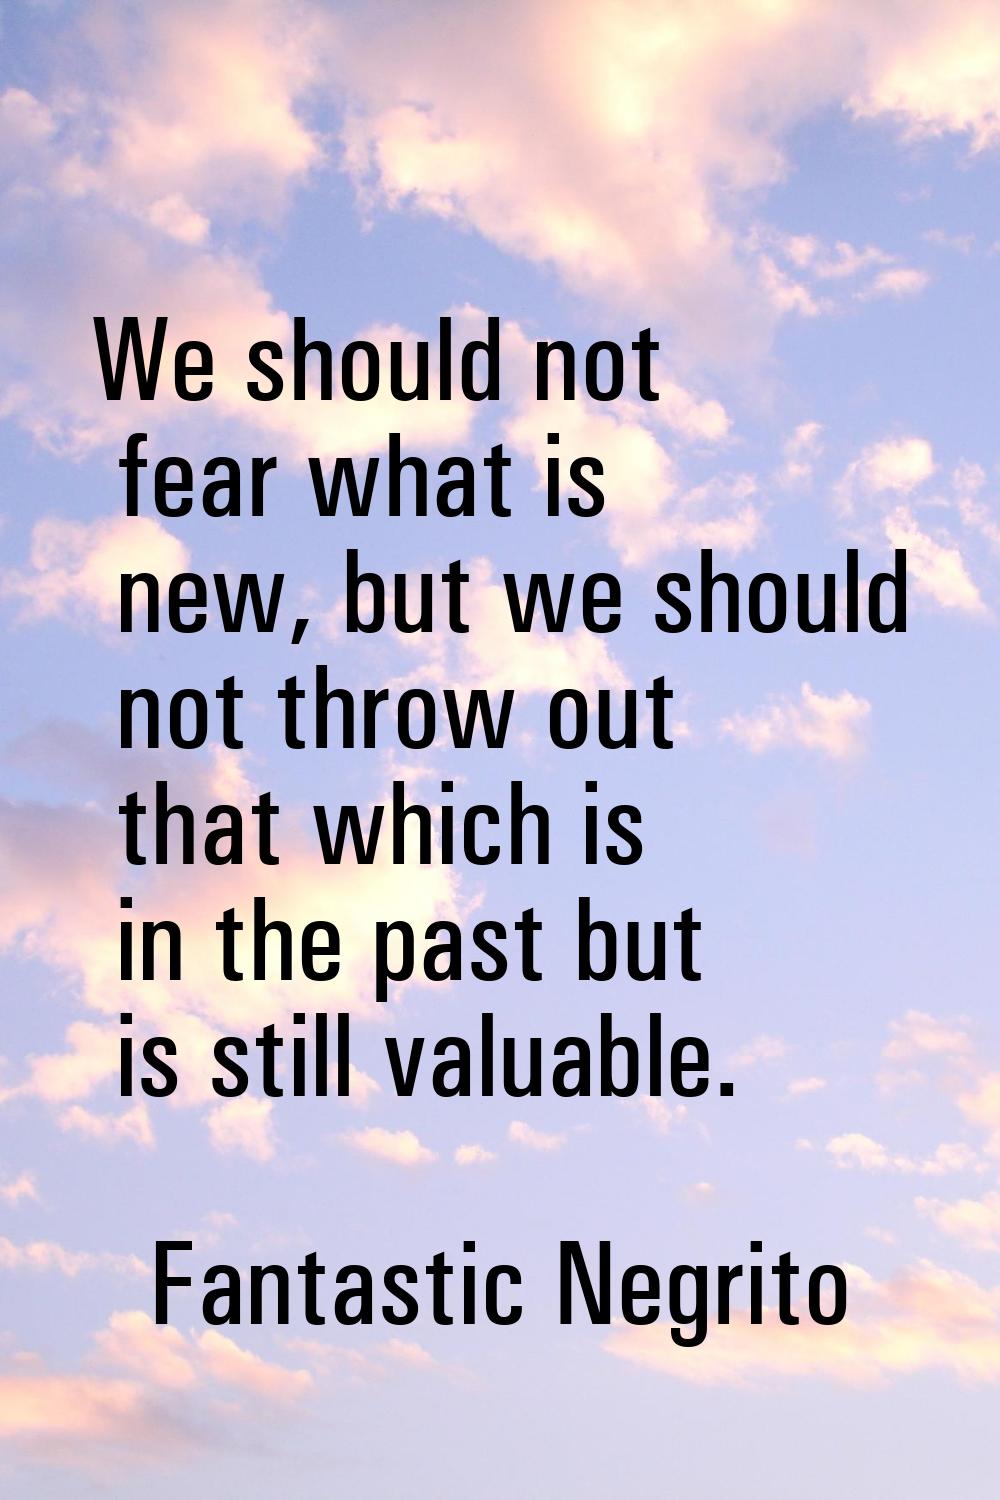 We should not fear what is new, but we should not throw out that which is in the past but is still 